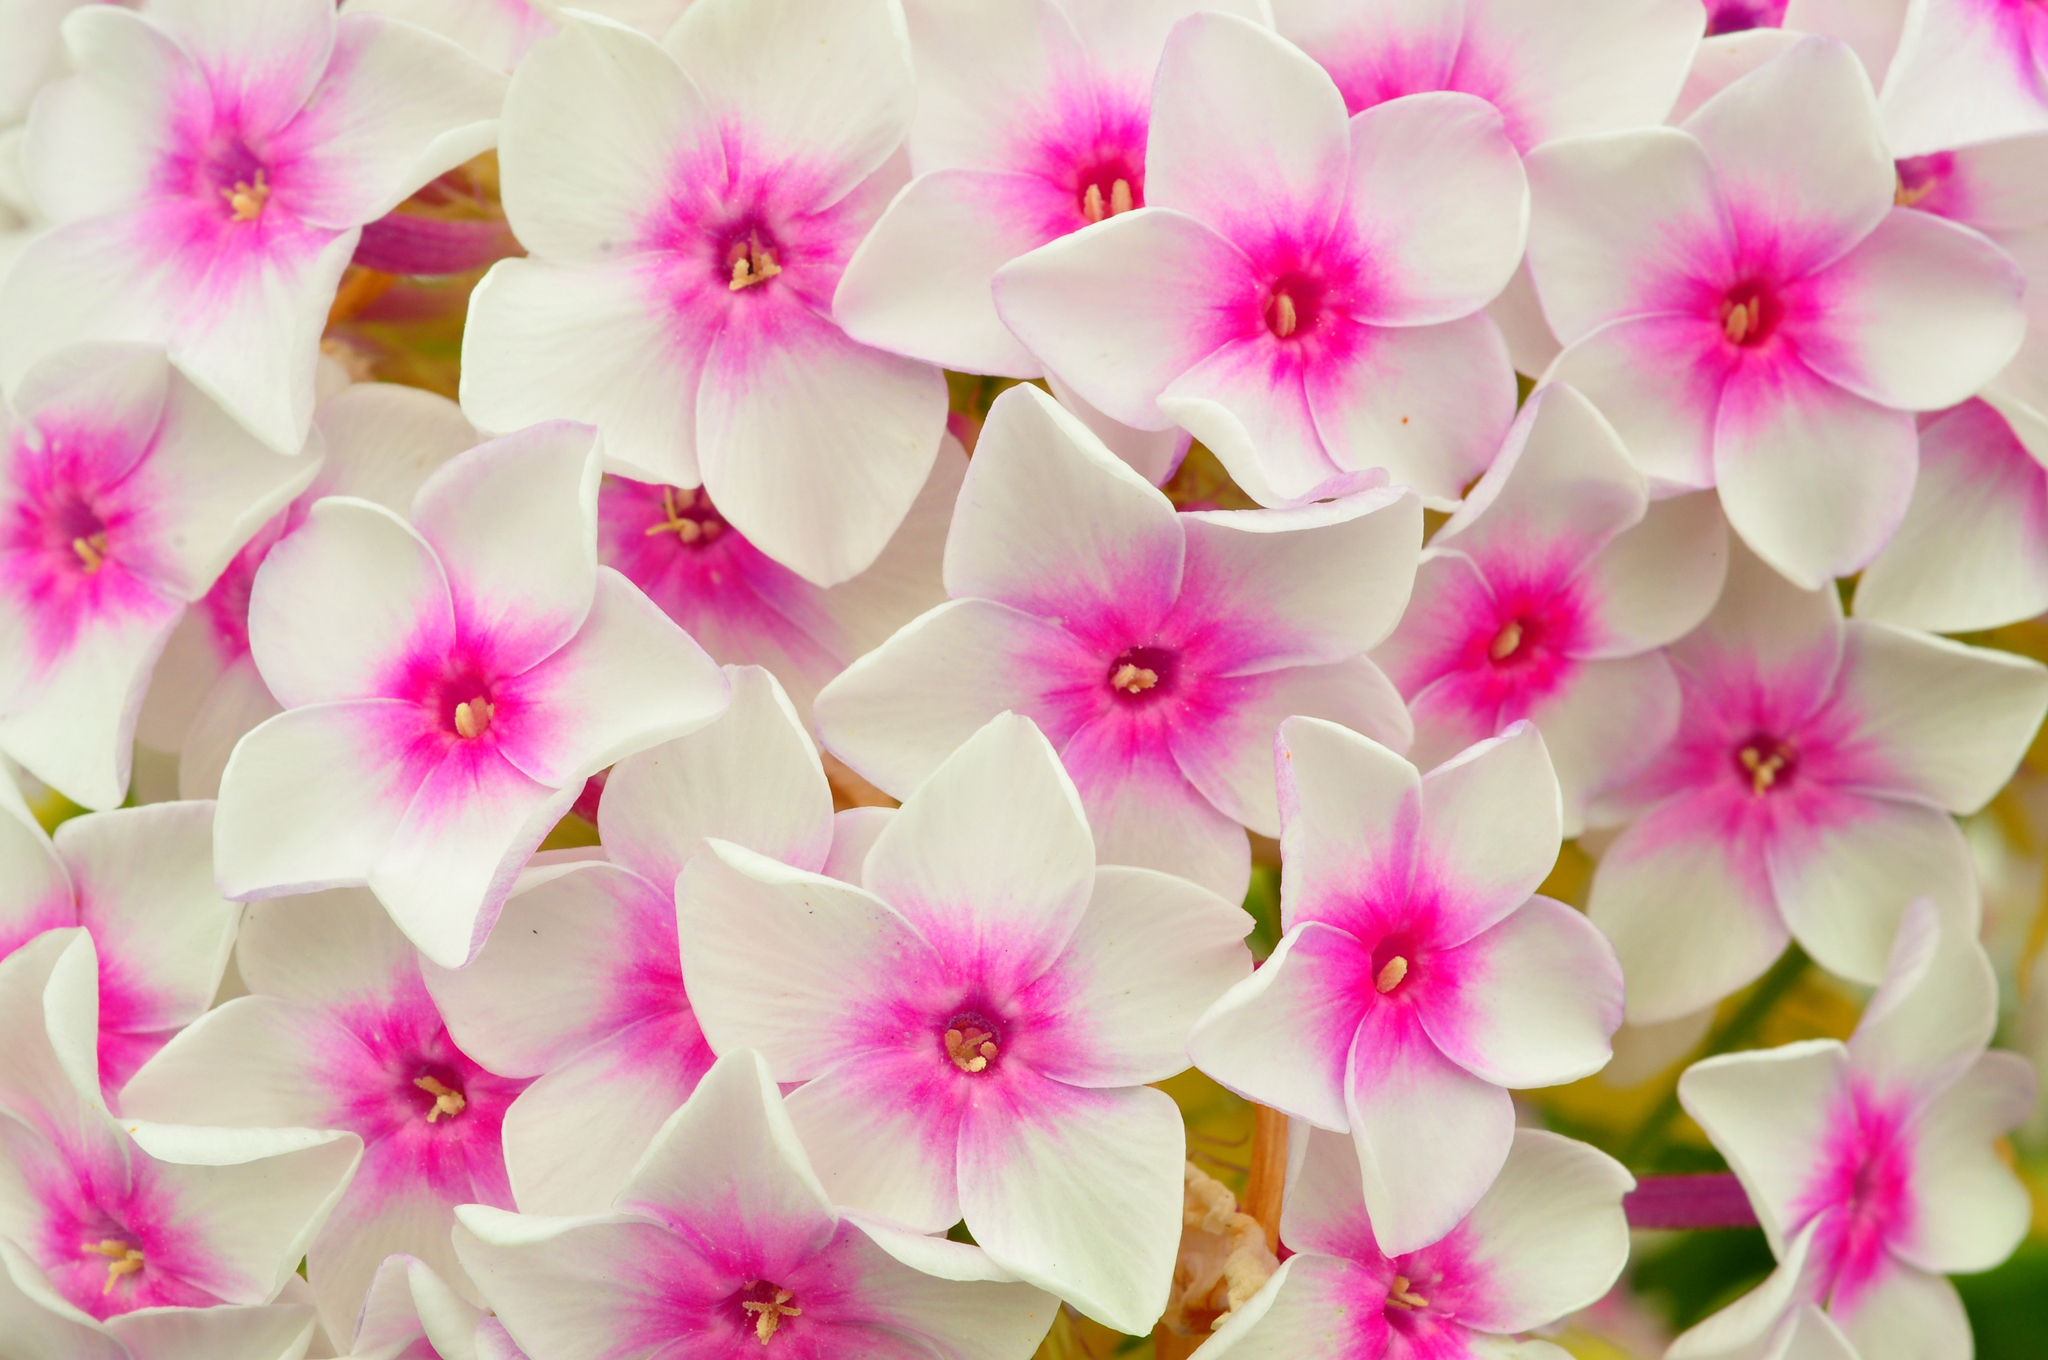 126036 download wallpaper pink, petals, flowers, phlox screensavers and pictures for free